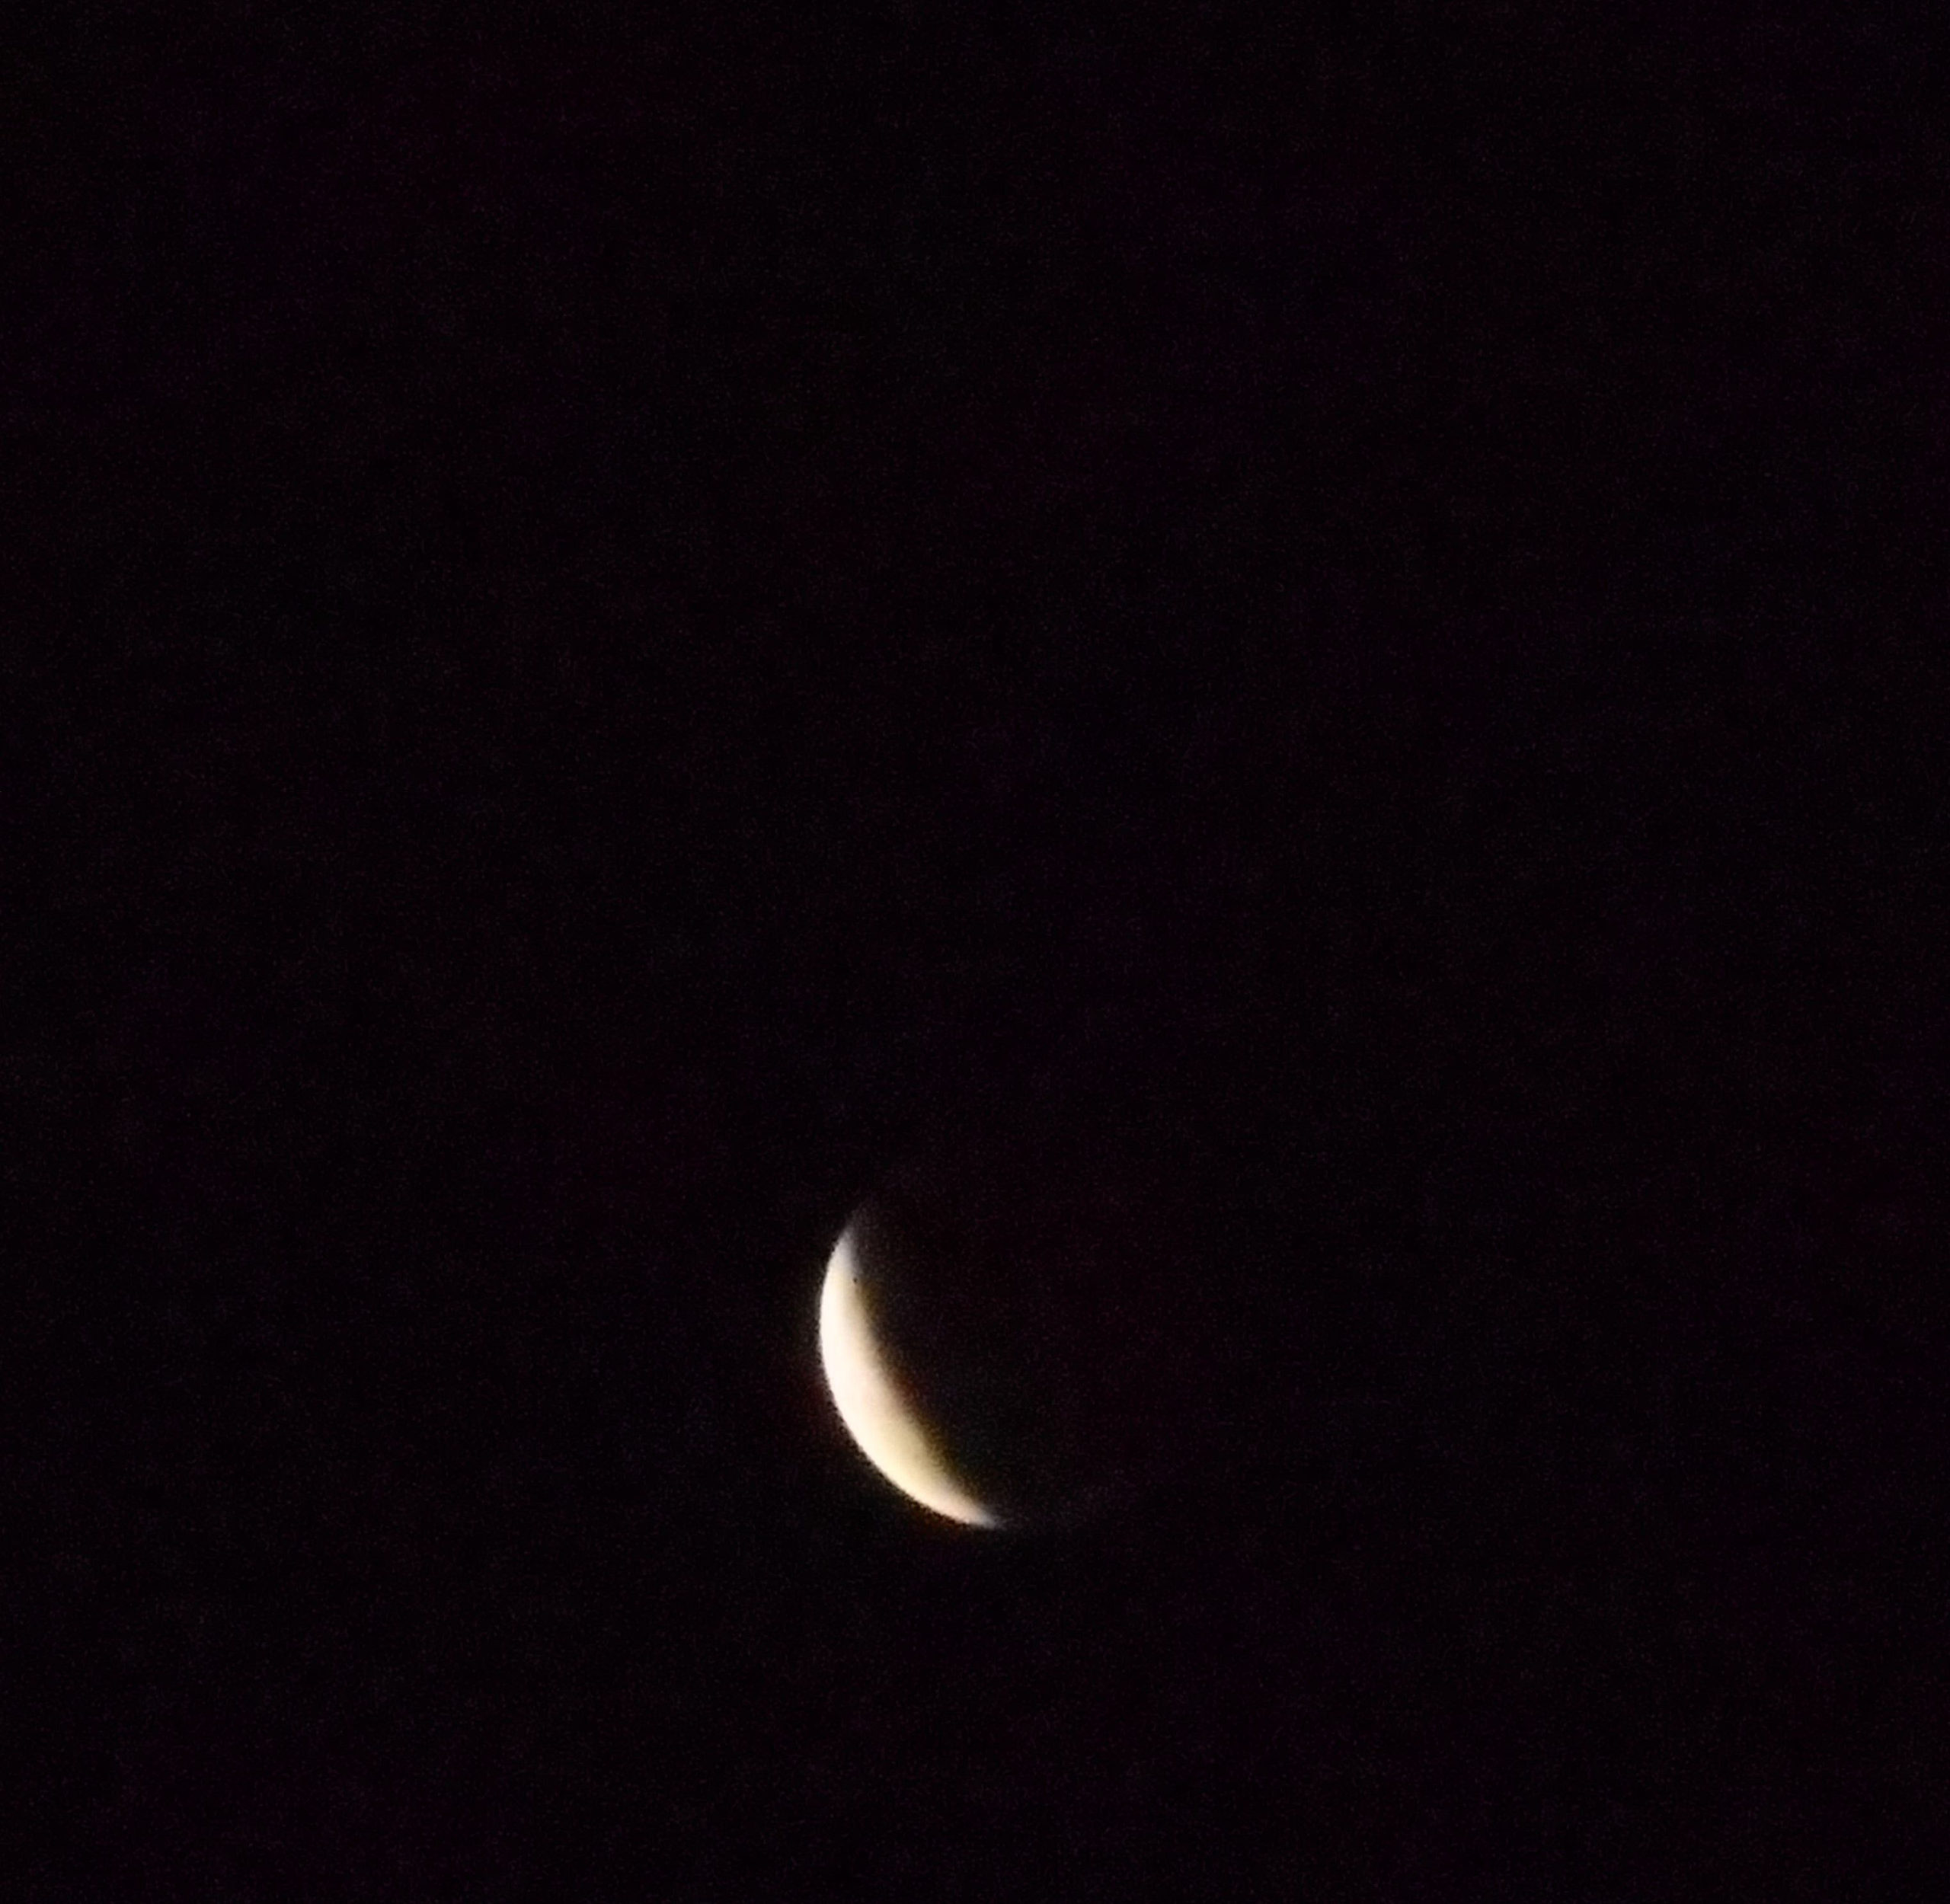 a photo fo the lunar eclipse from 2019. a dark sky with a crescent moon shape.